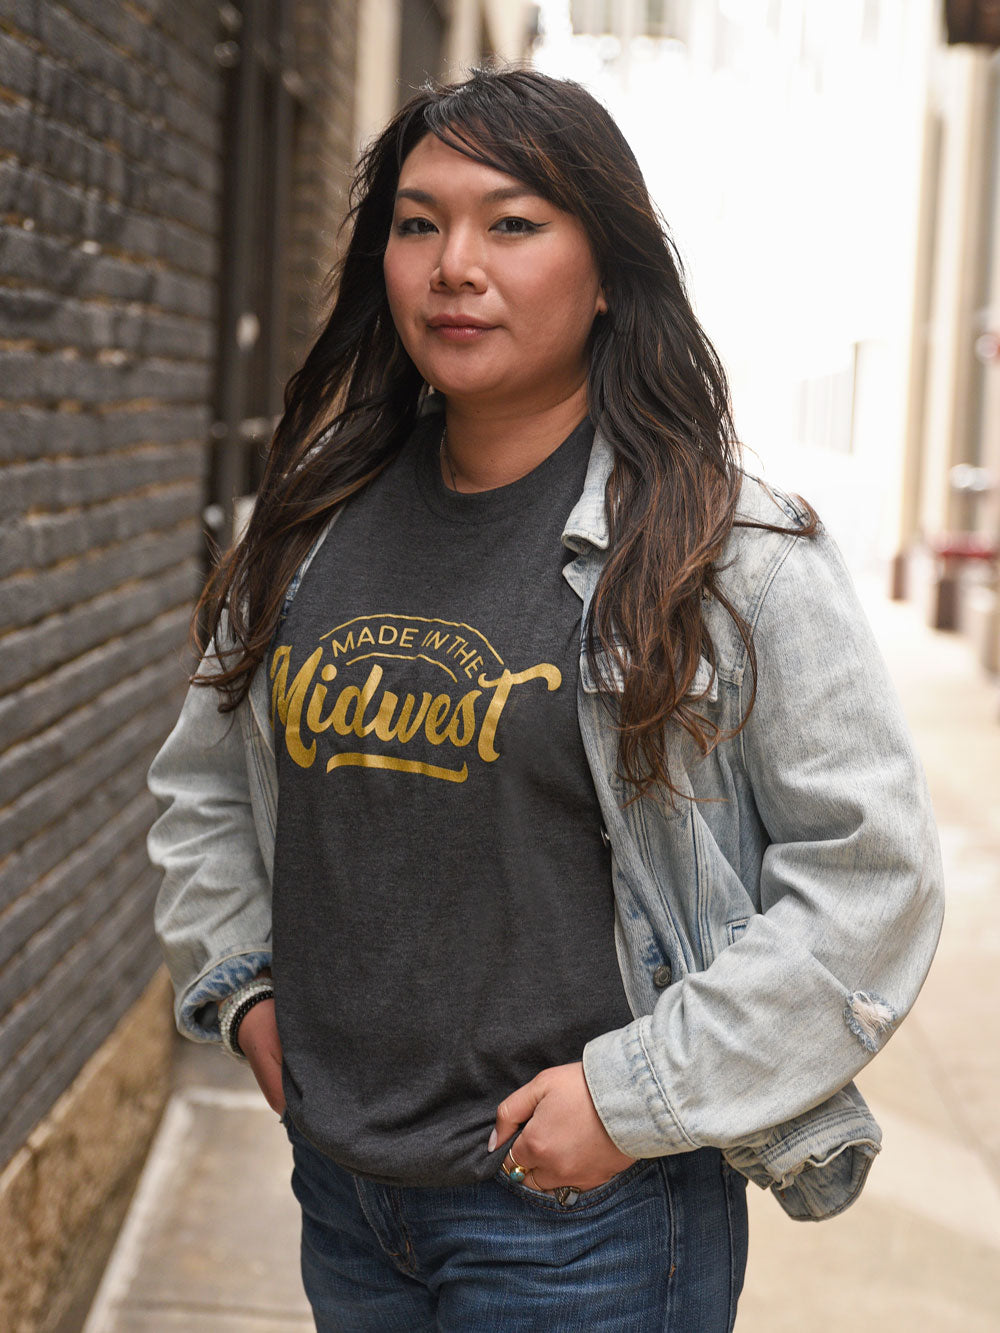 Made in the Midwest black heather t-shirt on model in alley